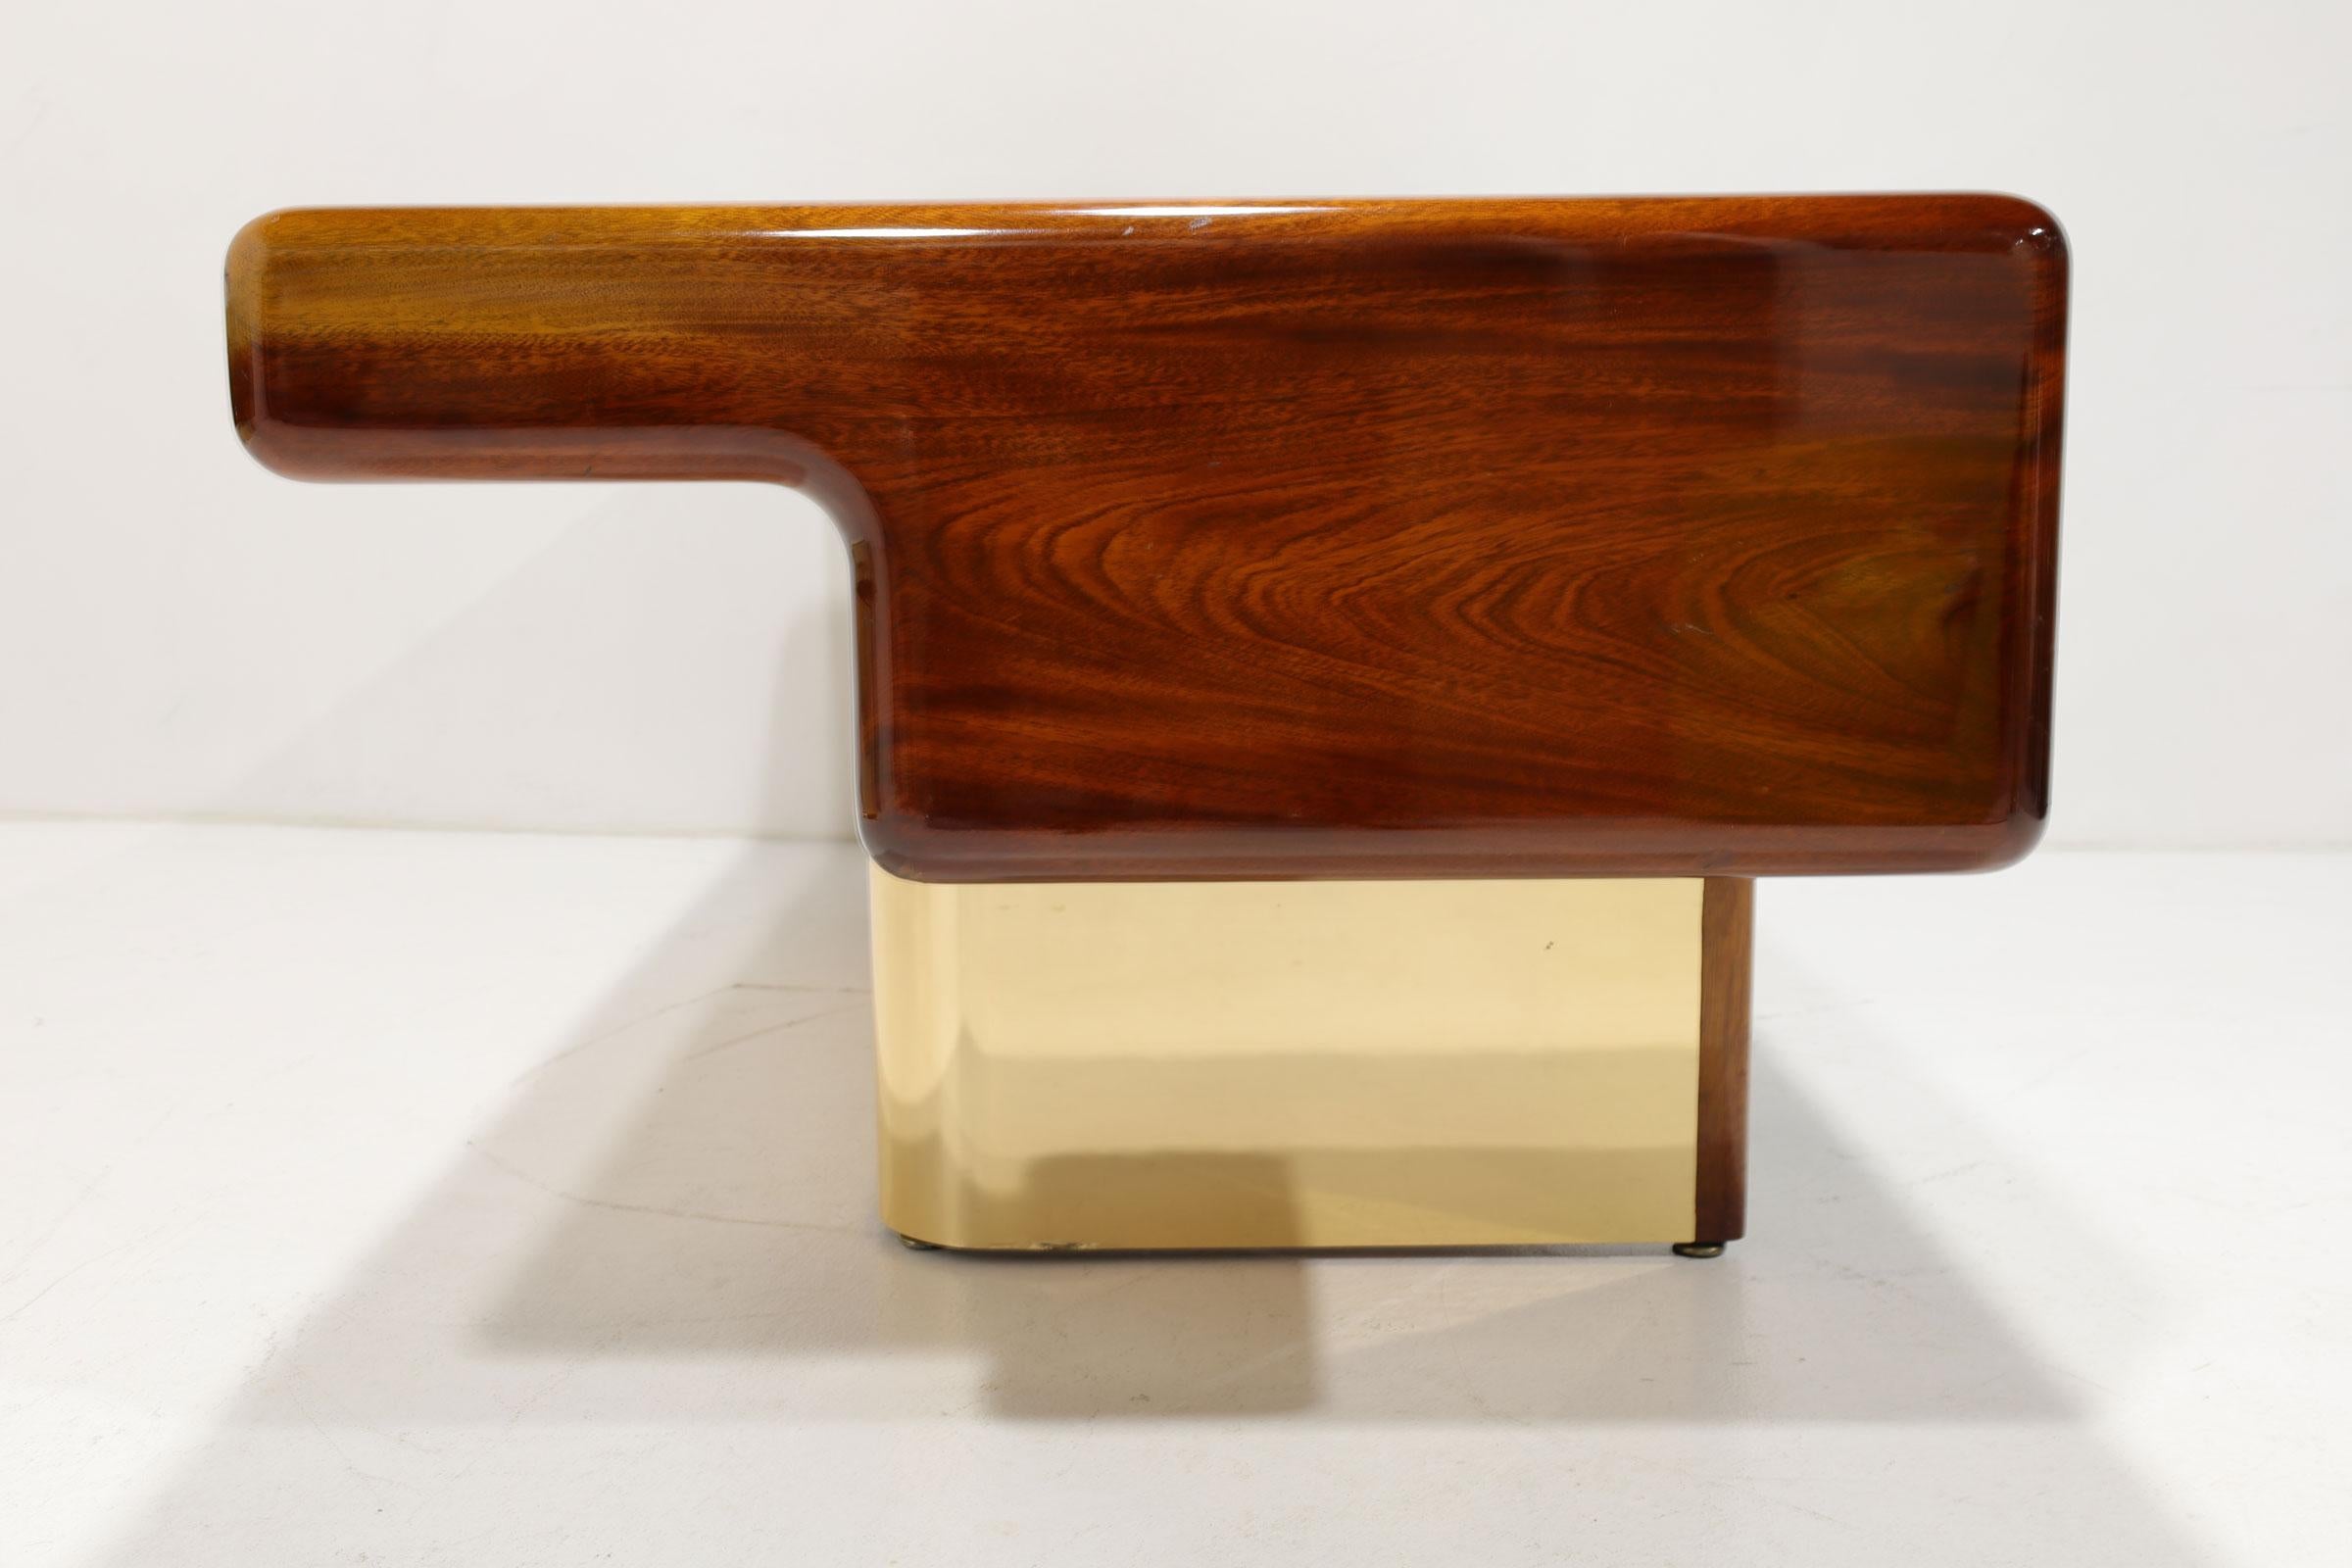 20th Century Vladimir Kagan Design Desk in Burl and Mahogany with Brass Finish Base For Sale